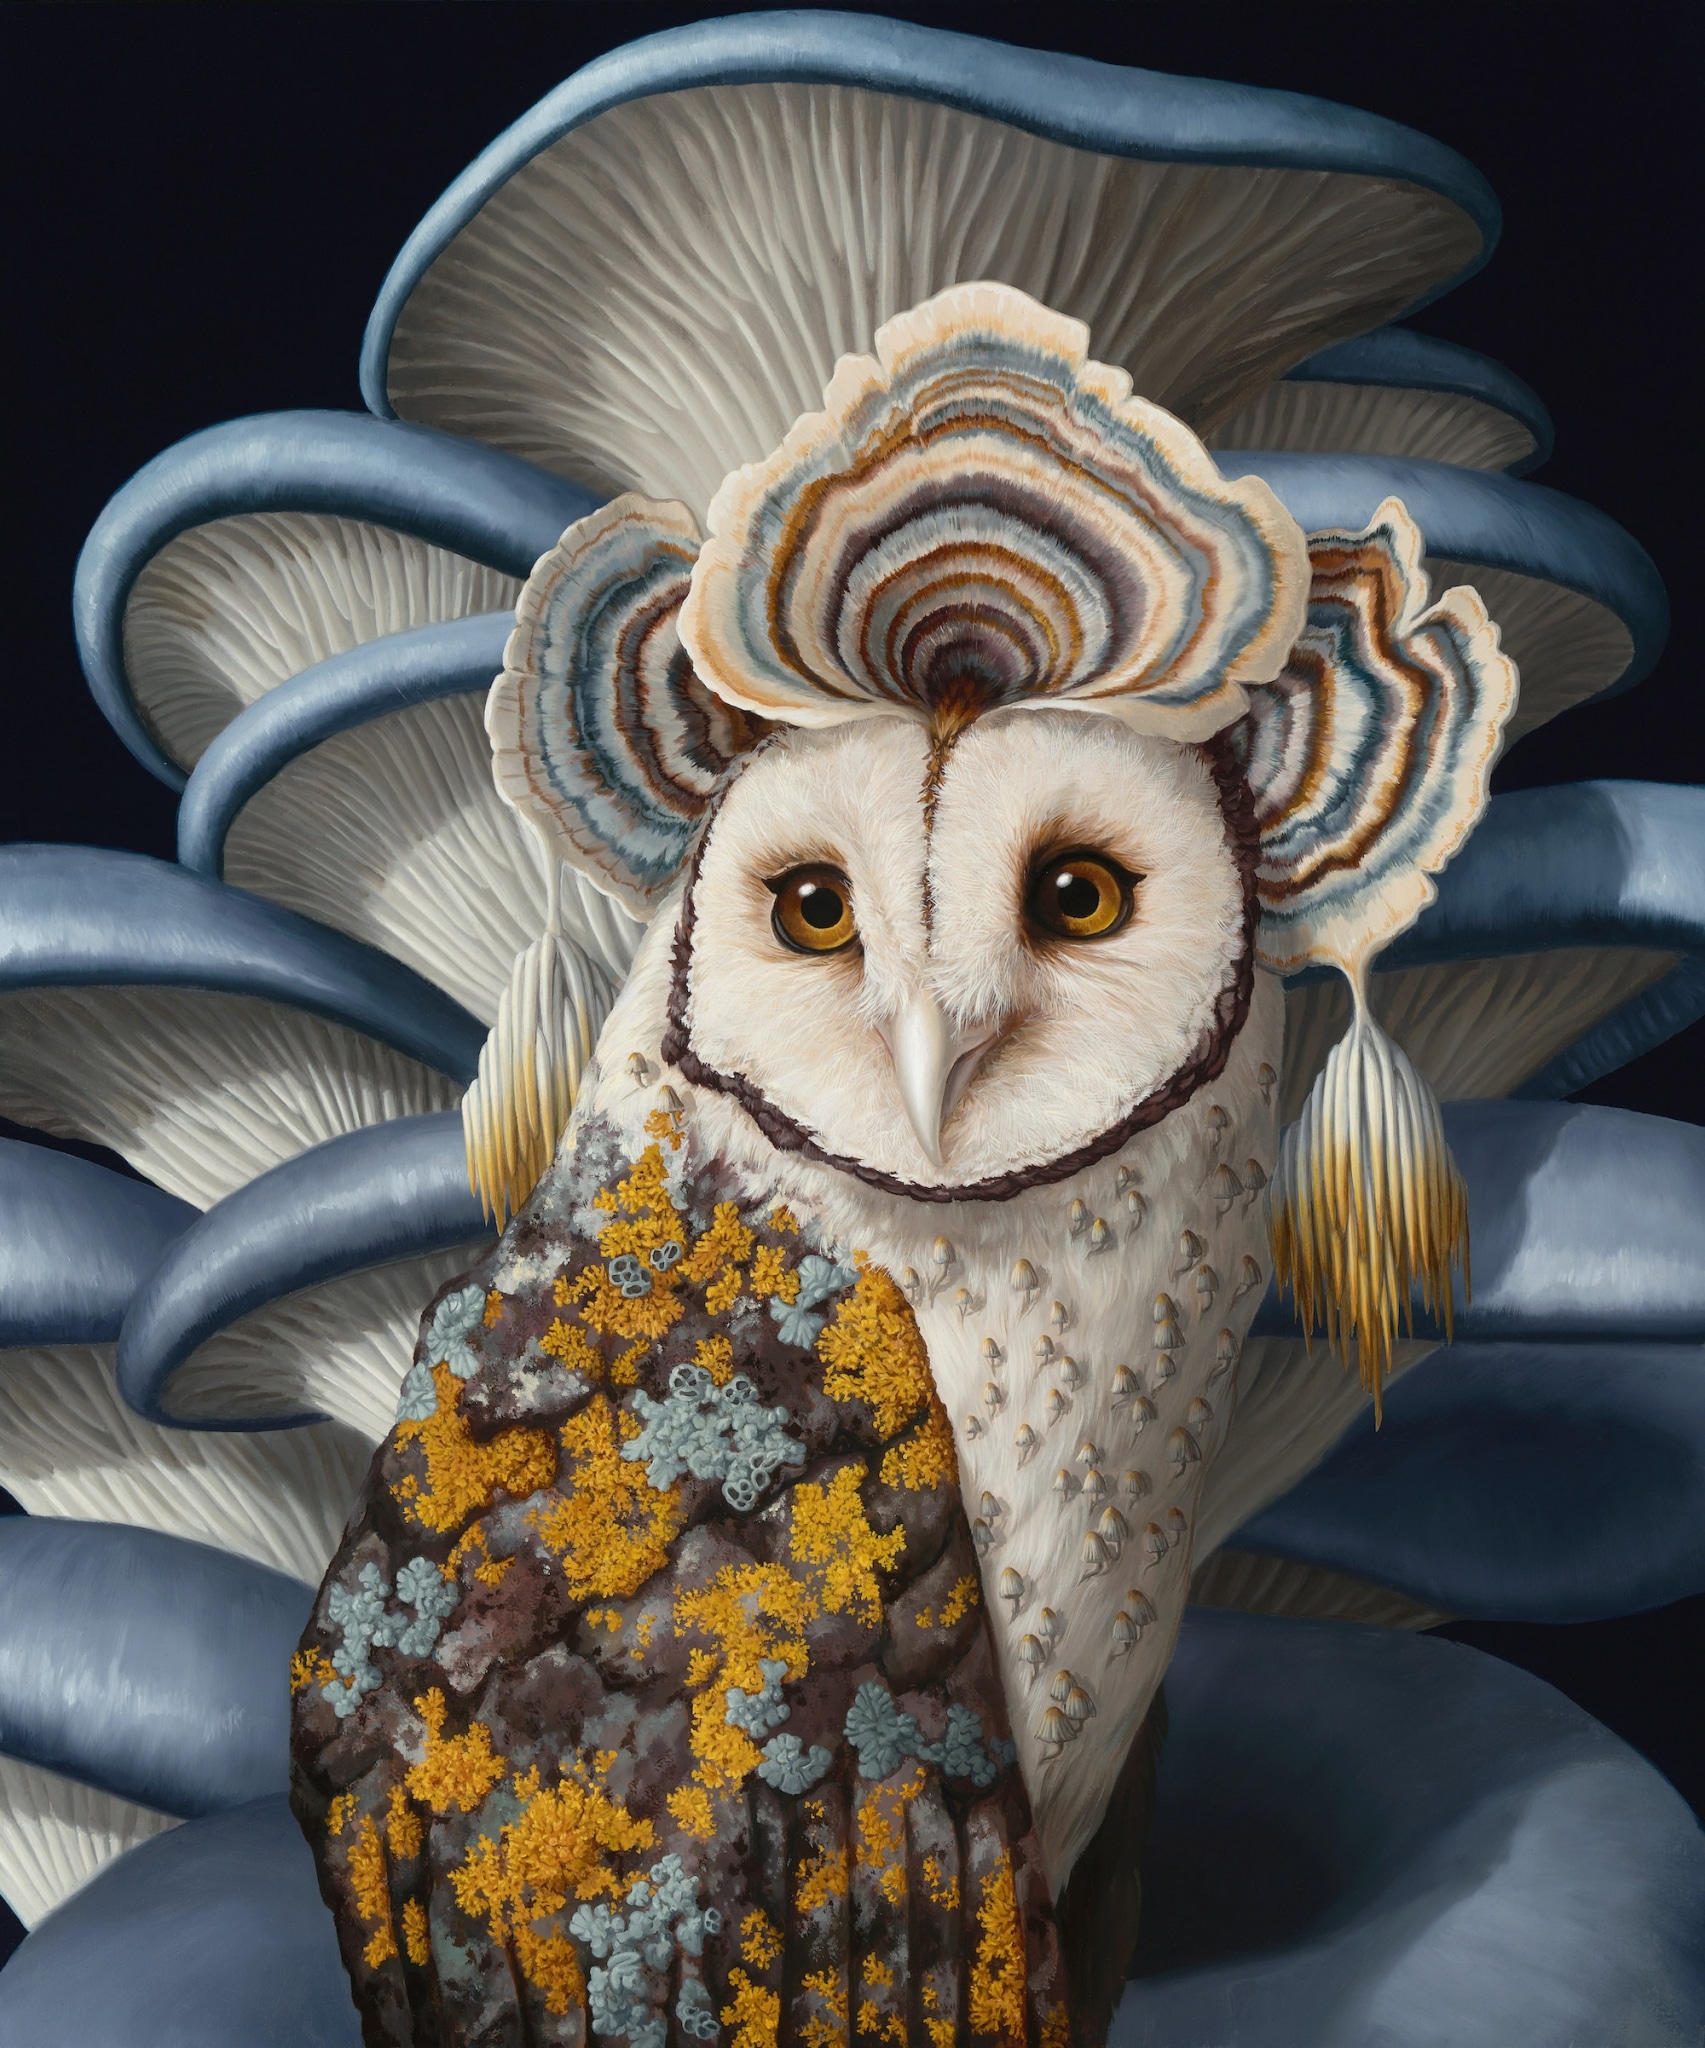 Artist Celebrates the Beauty of Nature by Fusing Animals With Plant Life